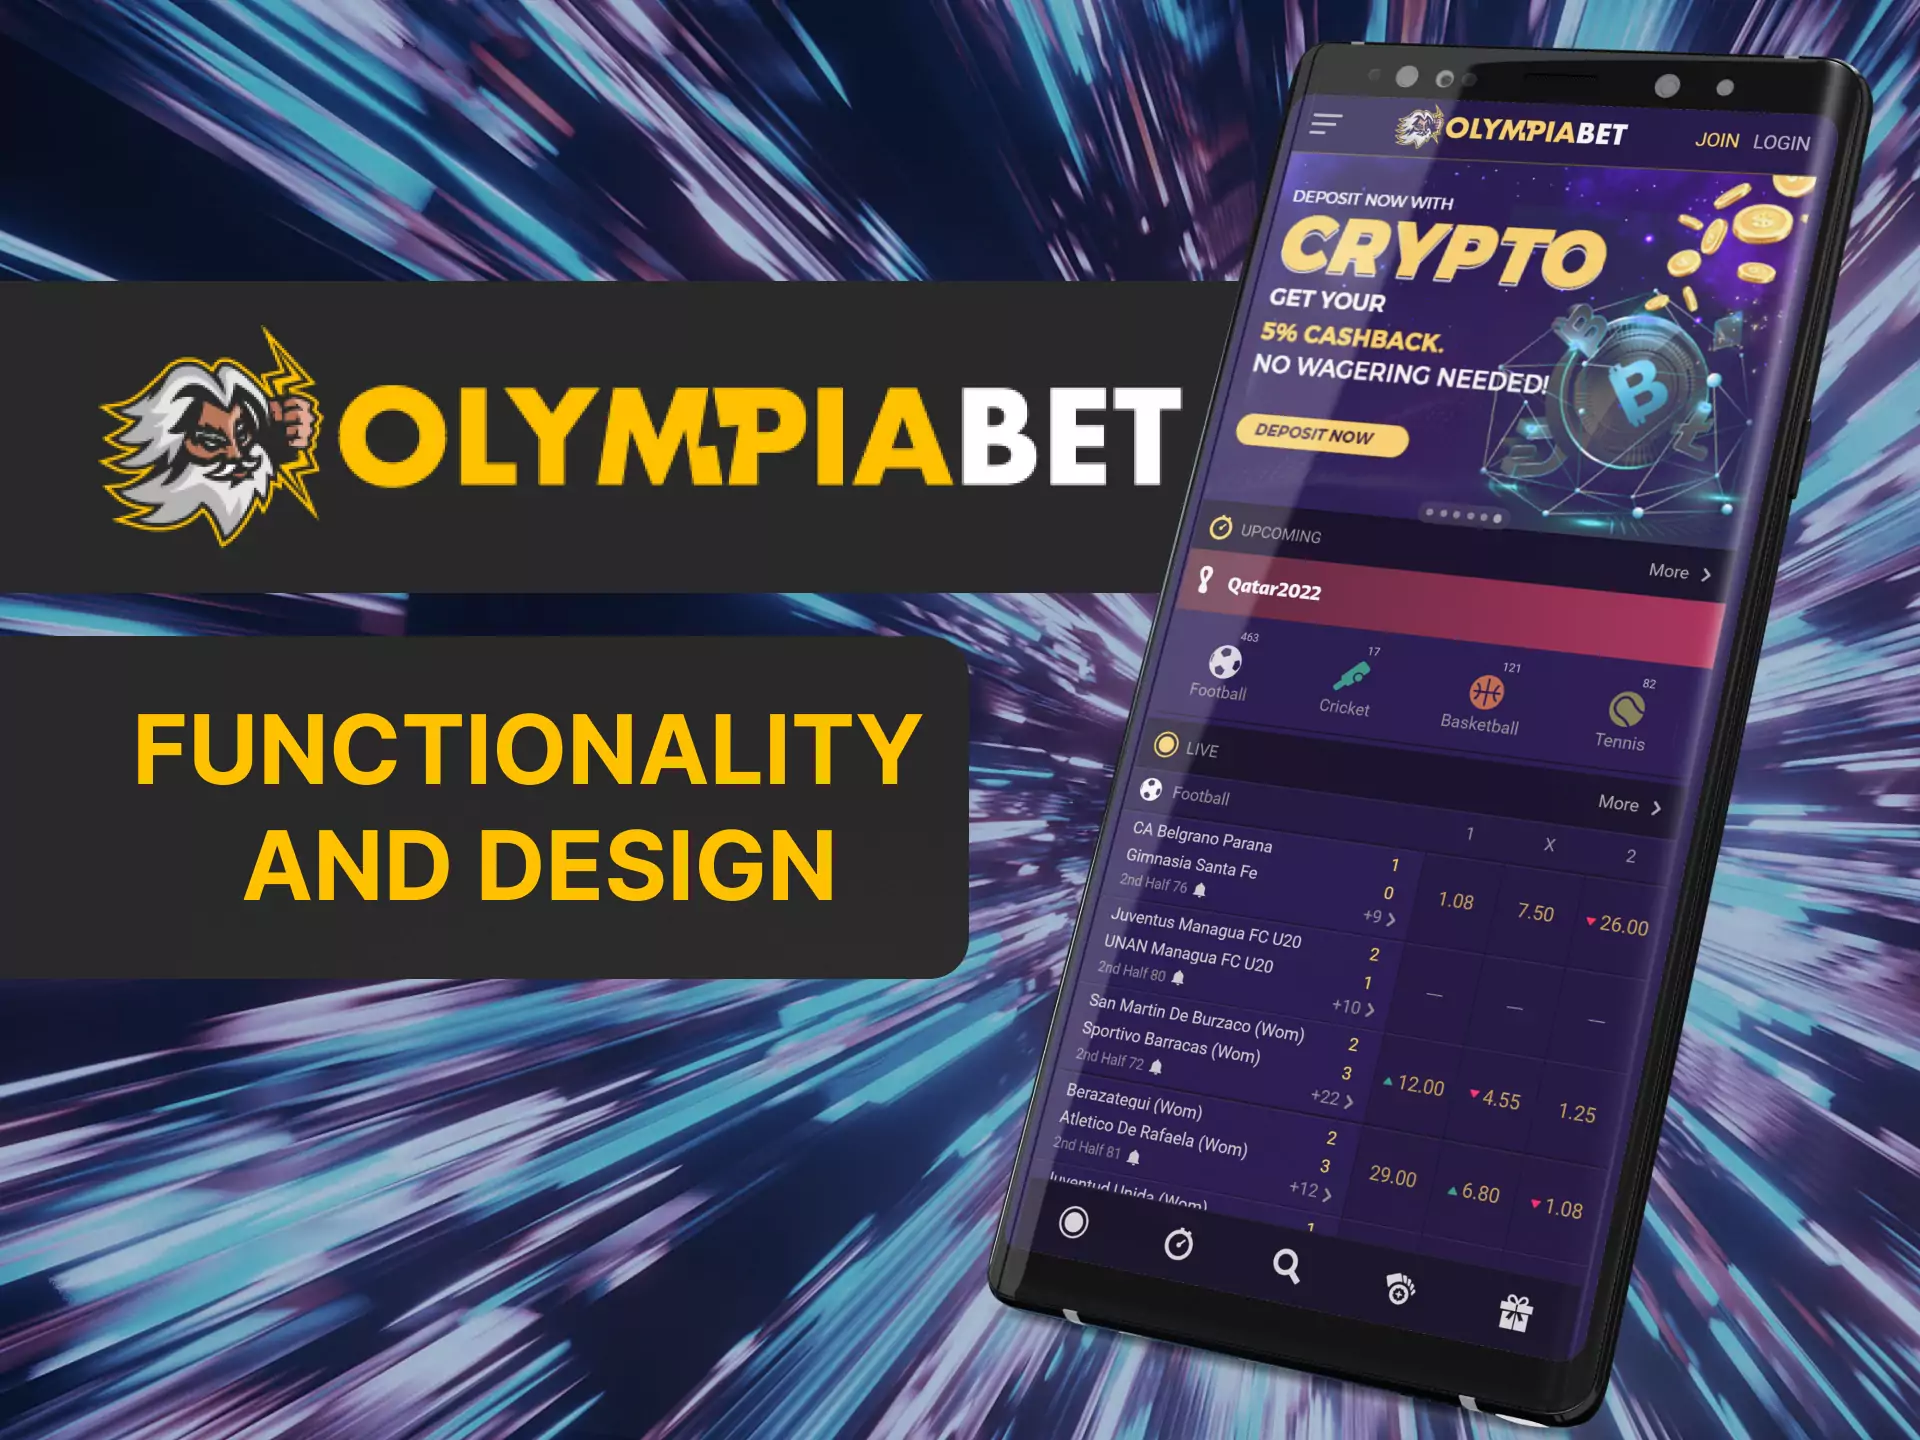 The Olympiabet app has a good design and useful functionality.